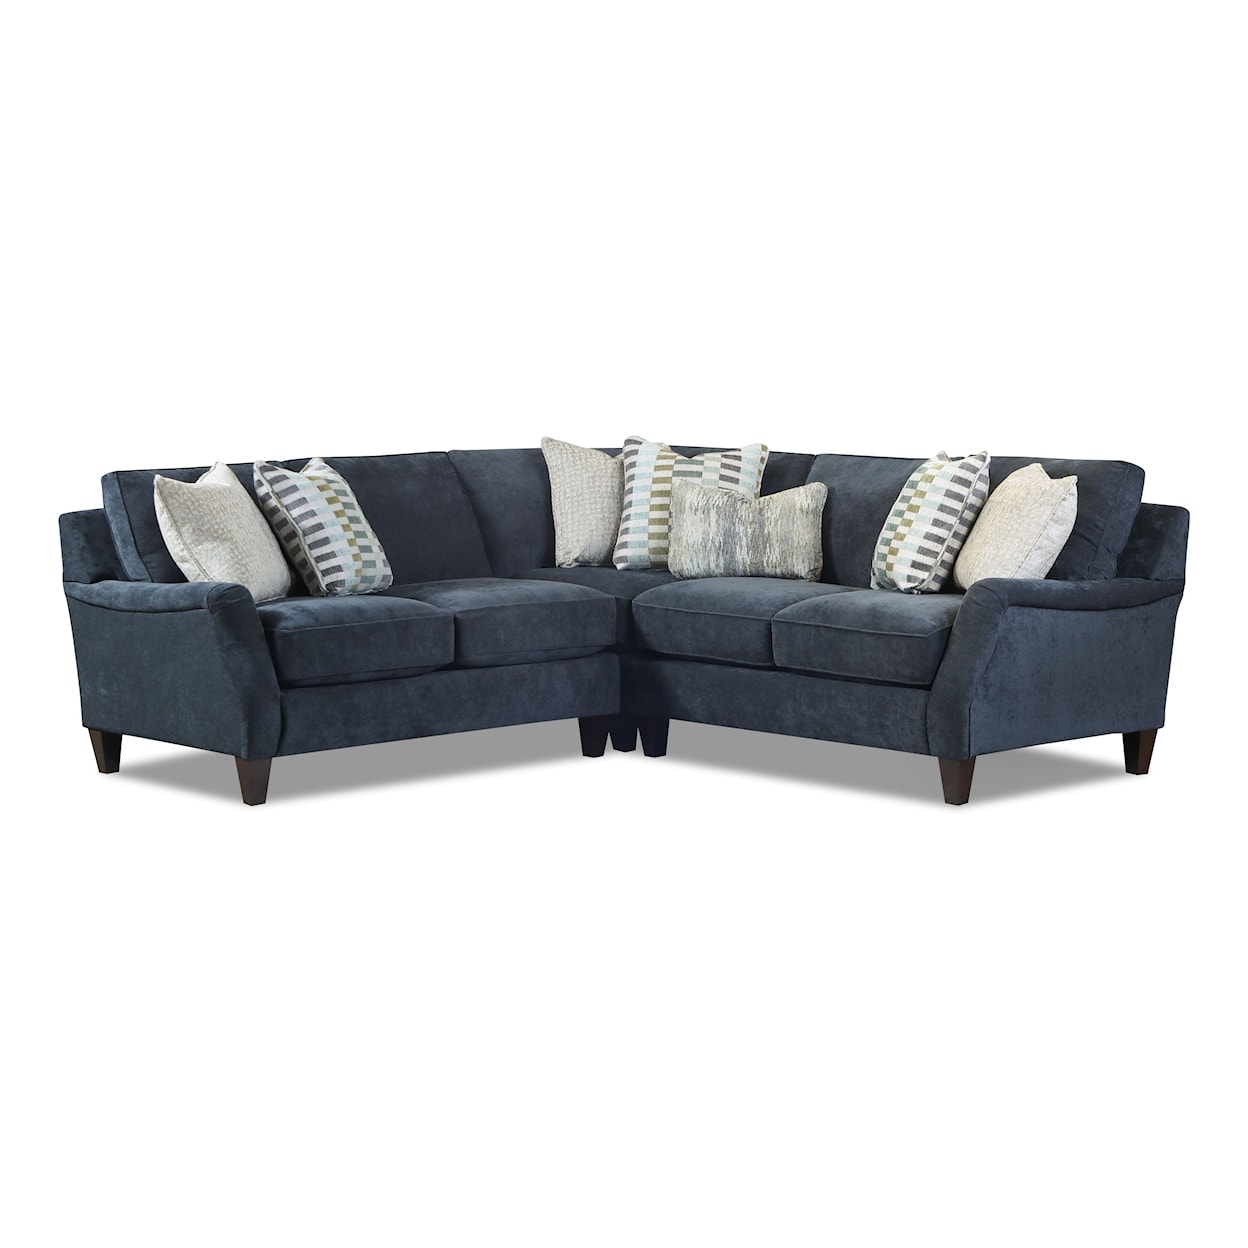 Fusion Furniture 7000 ELISE INK Sectional